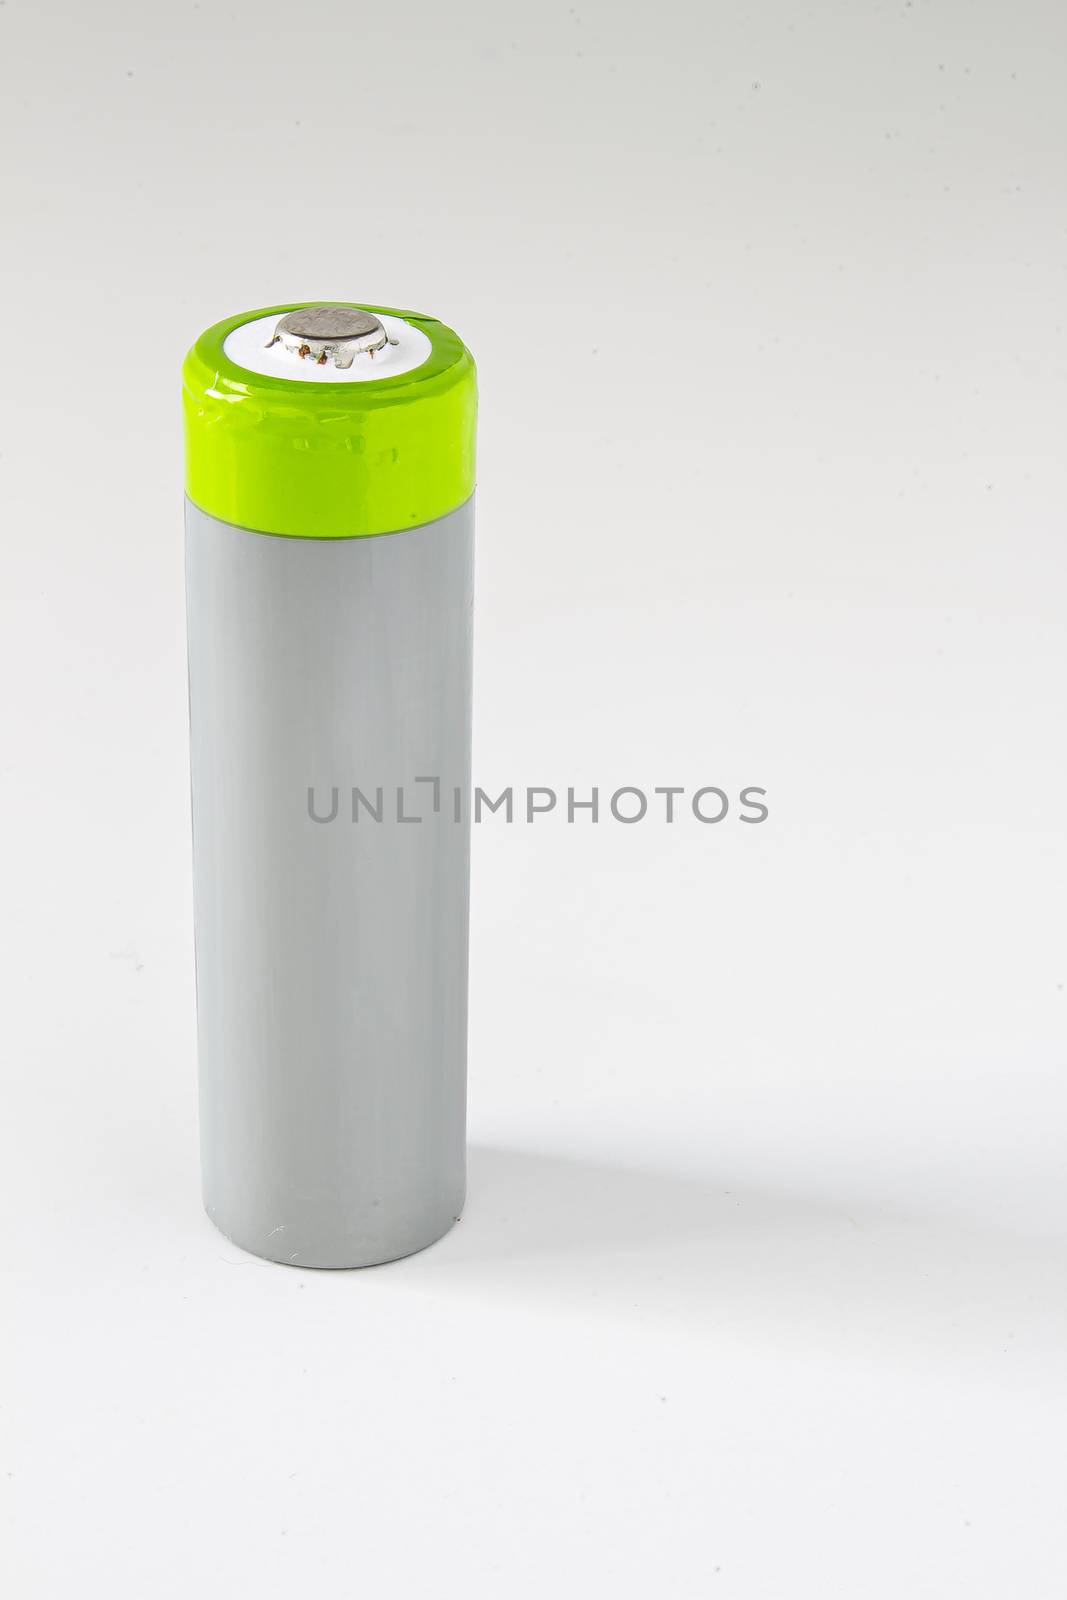 A single High-Capacity Rechargeable Battery with a shadow on a white background by oasisamuel